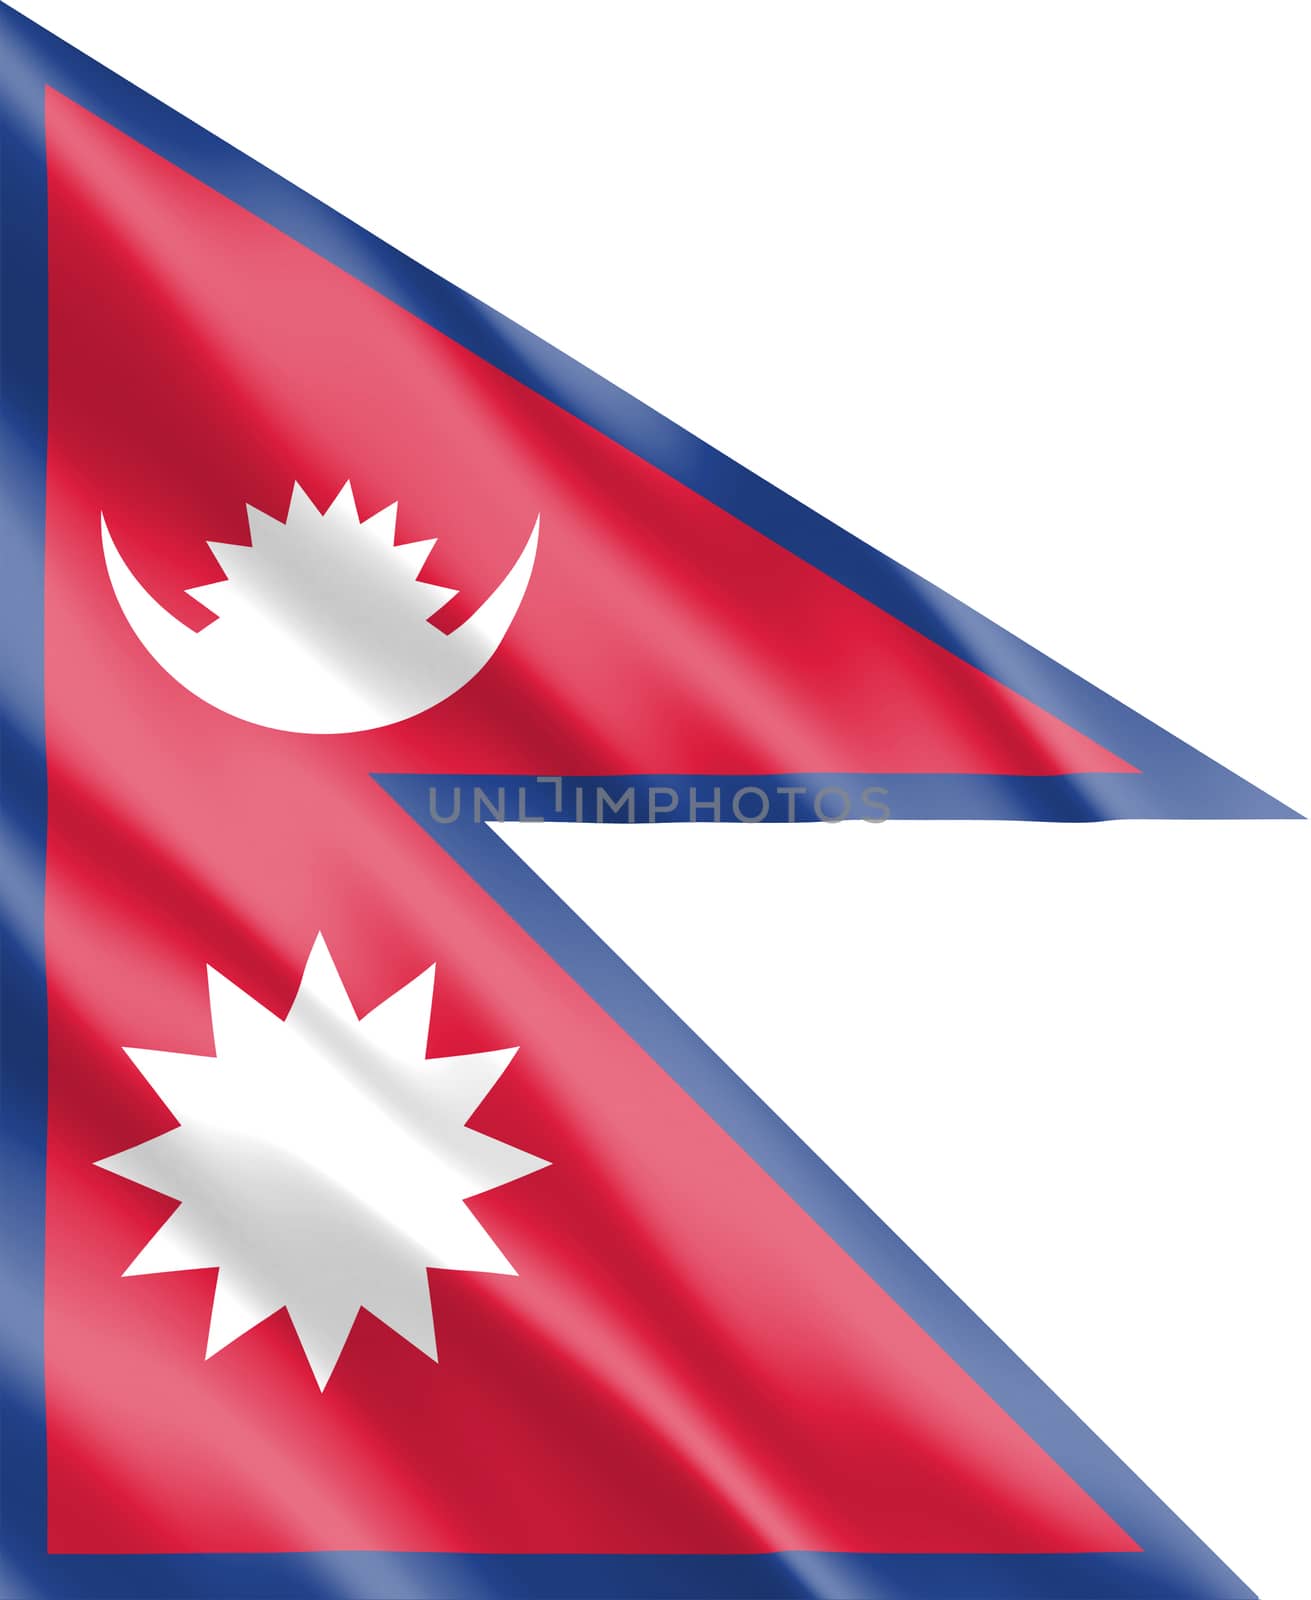 Silk wavy flag of Nepal graphic. Wavy Nepali flag illustration. Rippled Nepal country flag is a symbol of freedom, patriotism and independence. by Skylark